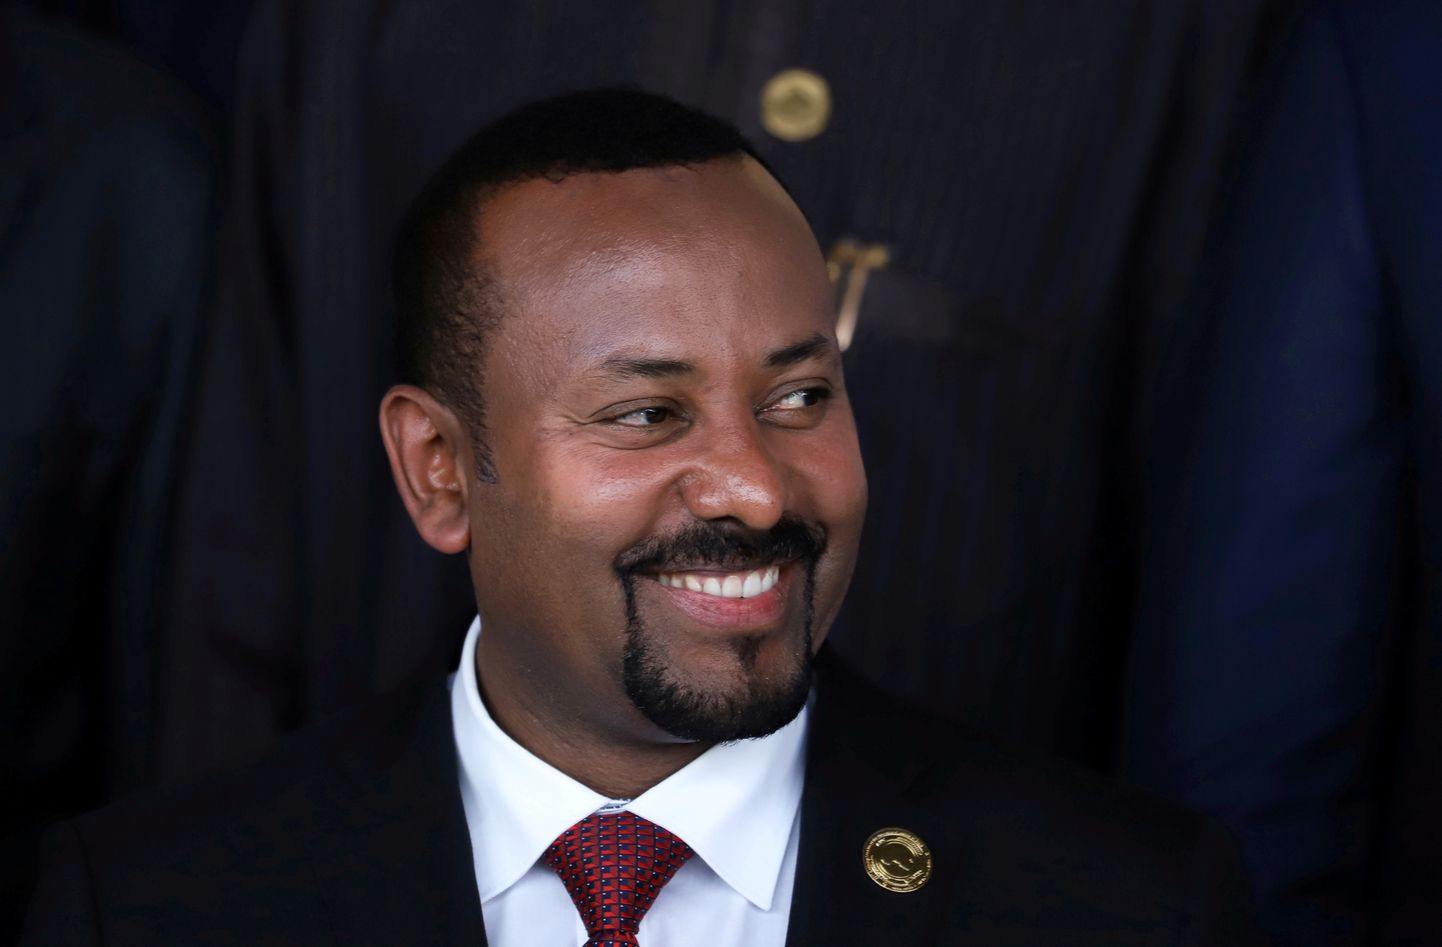 FILE PHOTO: Ethiopia's Prime Minister Abiy Ahmed poses for a photograph during the opening of the 33rd Ordinary Session of the Assembly of the Heads of State and the Government of the African Union (AU) in Addis Ababa, Ethiopia, February 9, 2020. REUTERS/Tiksa Negeri/File Photo